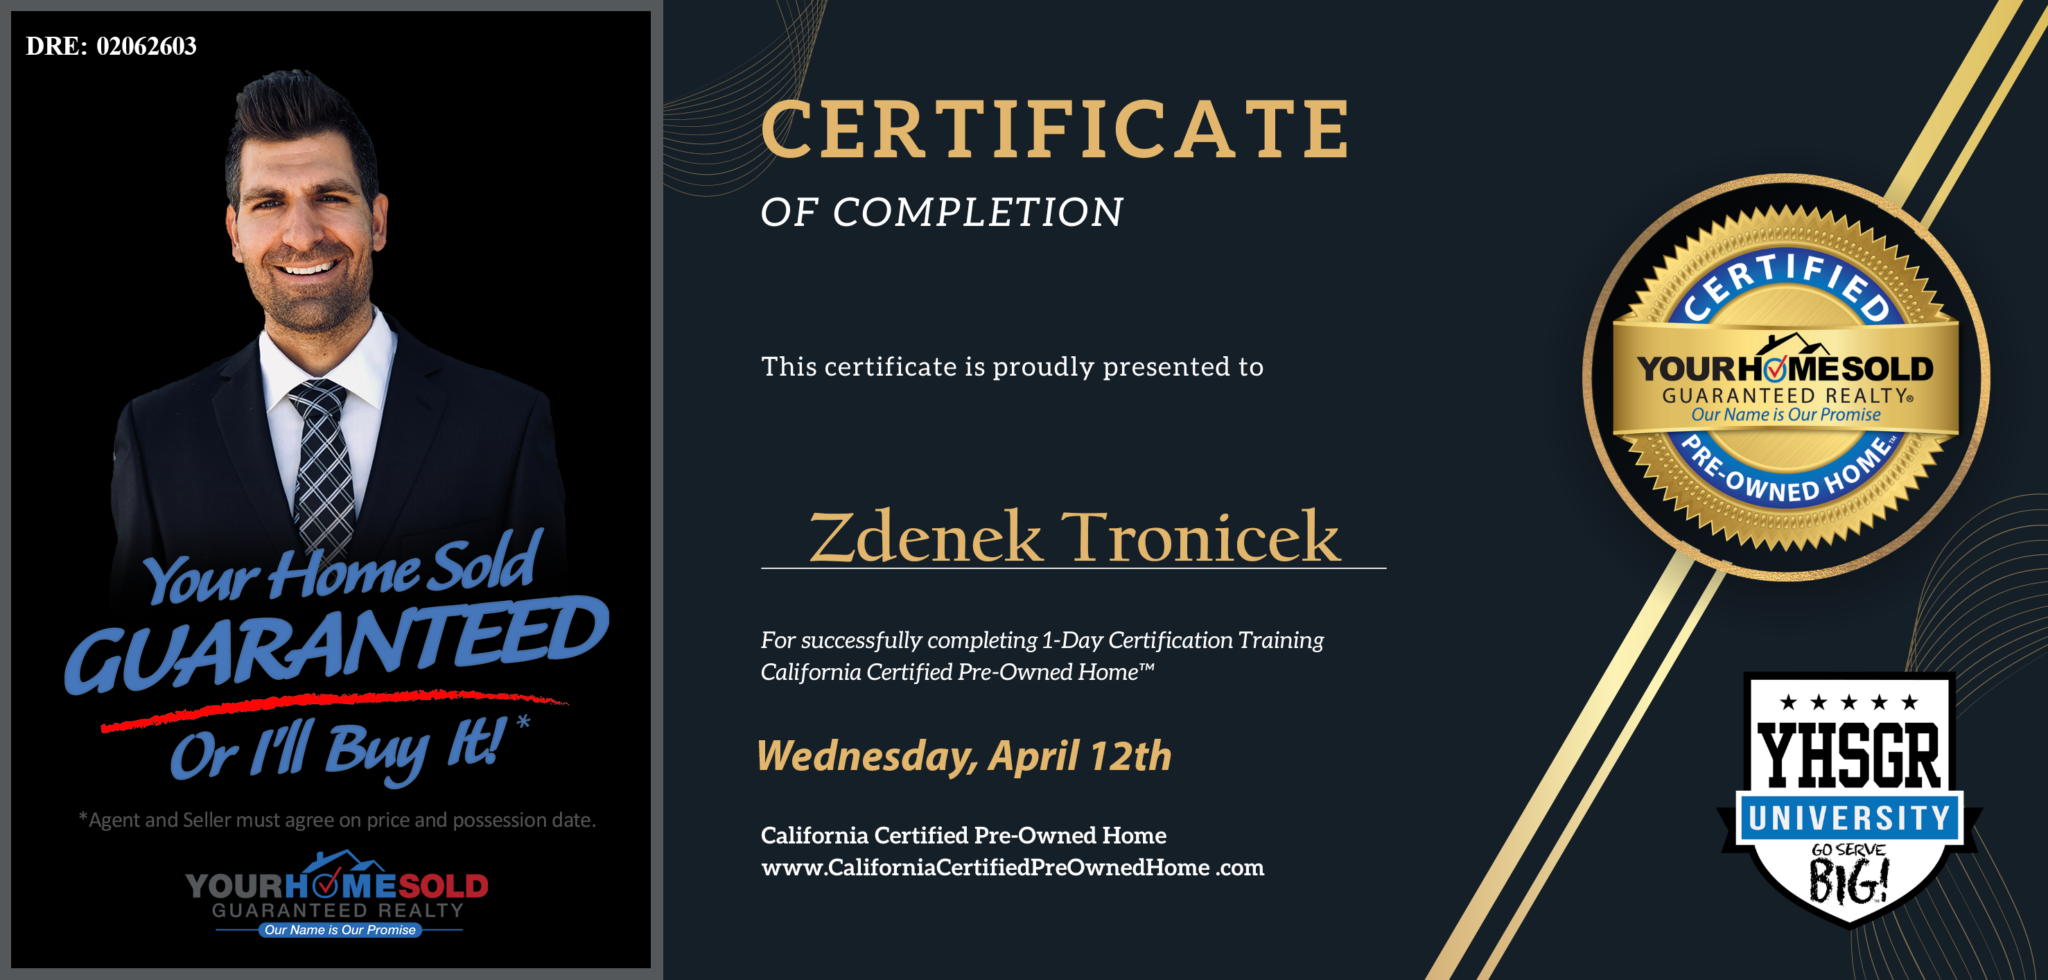 Your-Home-Sold-Guaranteed-Realty-Certified-Pre-Owned-Homes-CPO-Agents-Certification-Workshop-Zdenek-Tronicek-2048x980.png